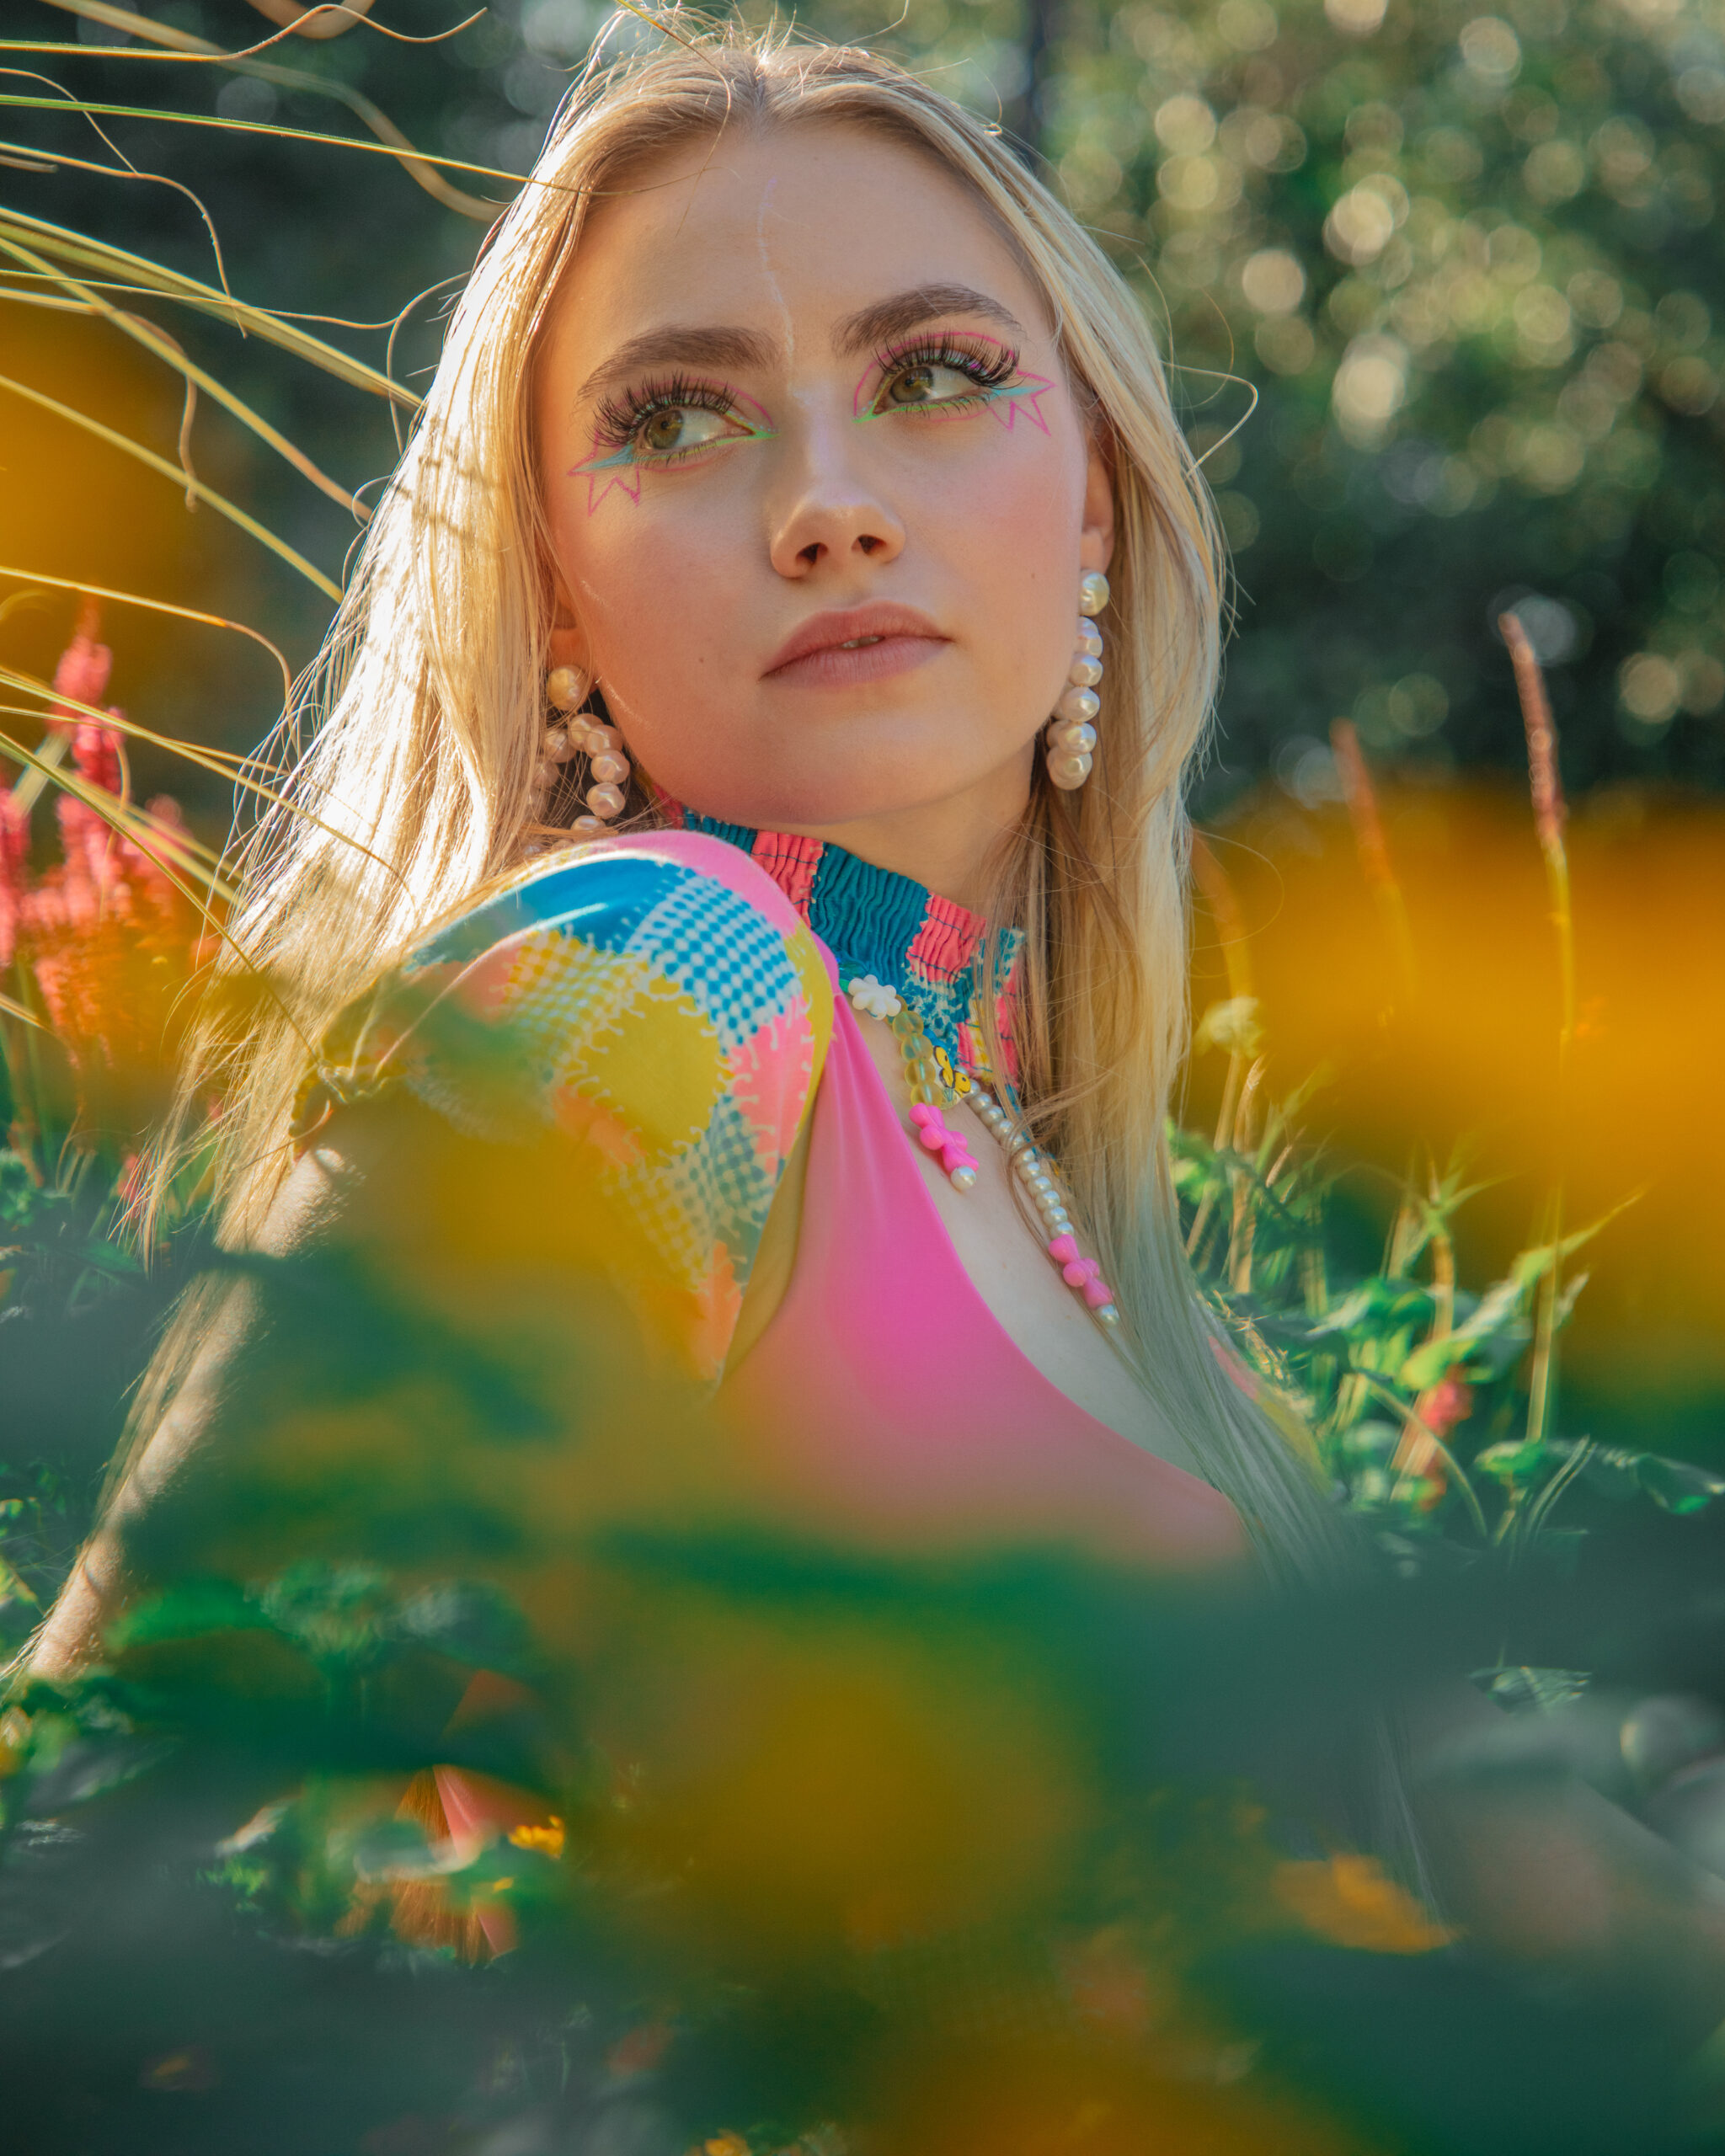 The image features a woman with blonde hair and makeup that includes prominent pink and green details around her eyes. She is wearing large pearl earrings and a colorful garment with pink, blue, and yellow patterns. The woman is gazing upwards, and the photo is taken from a lower angle with some yellow flowers in the foreground, which are blurred, while the woman is in focus. The background is a sunlit environment